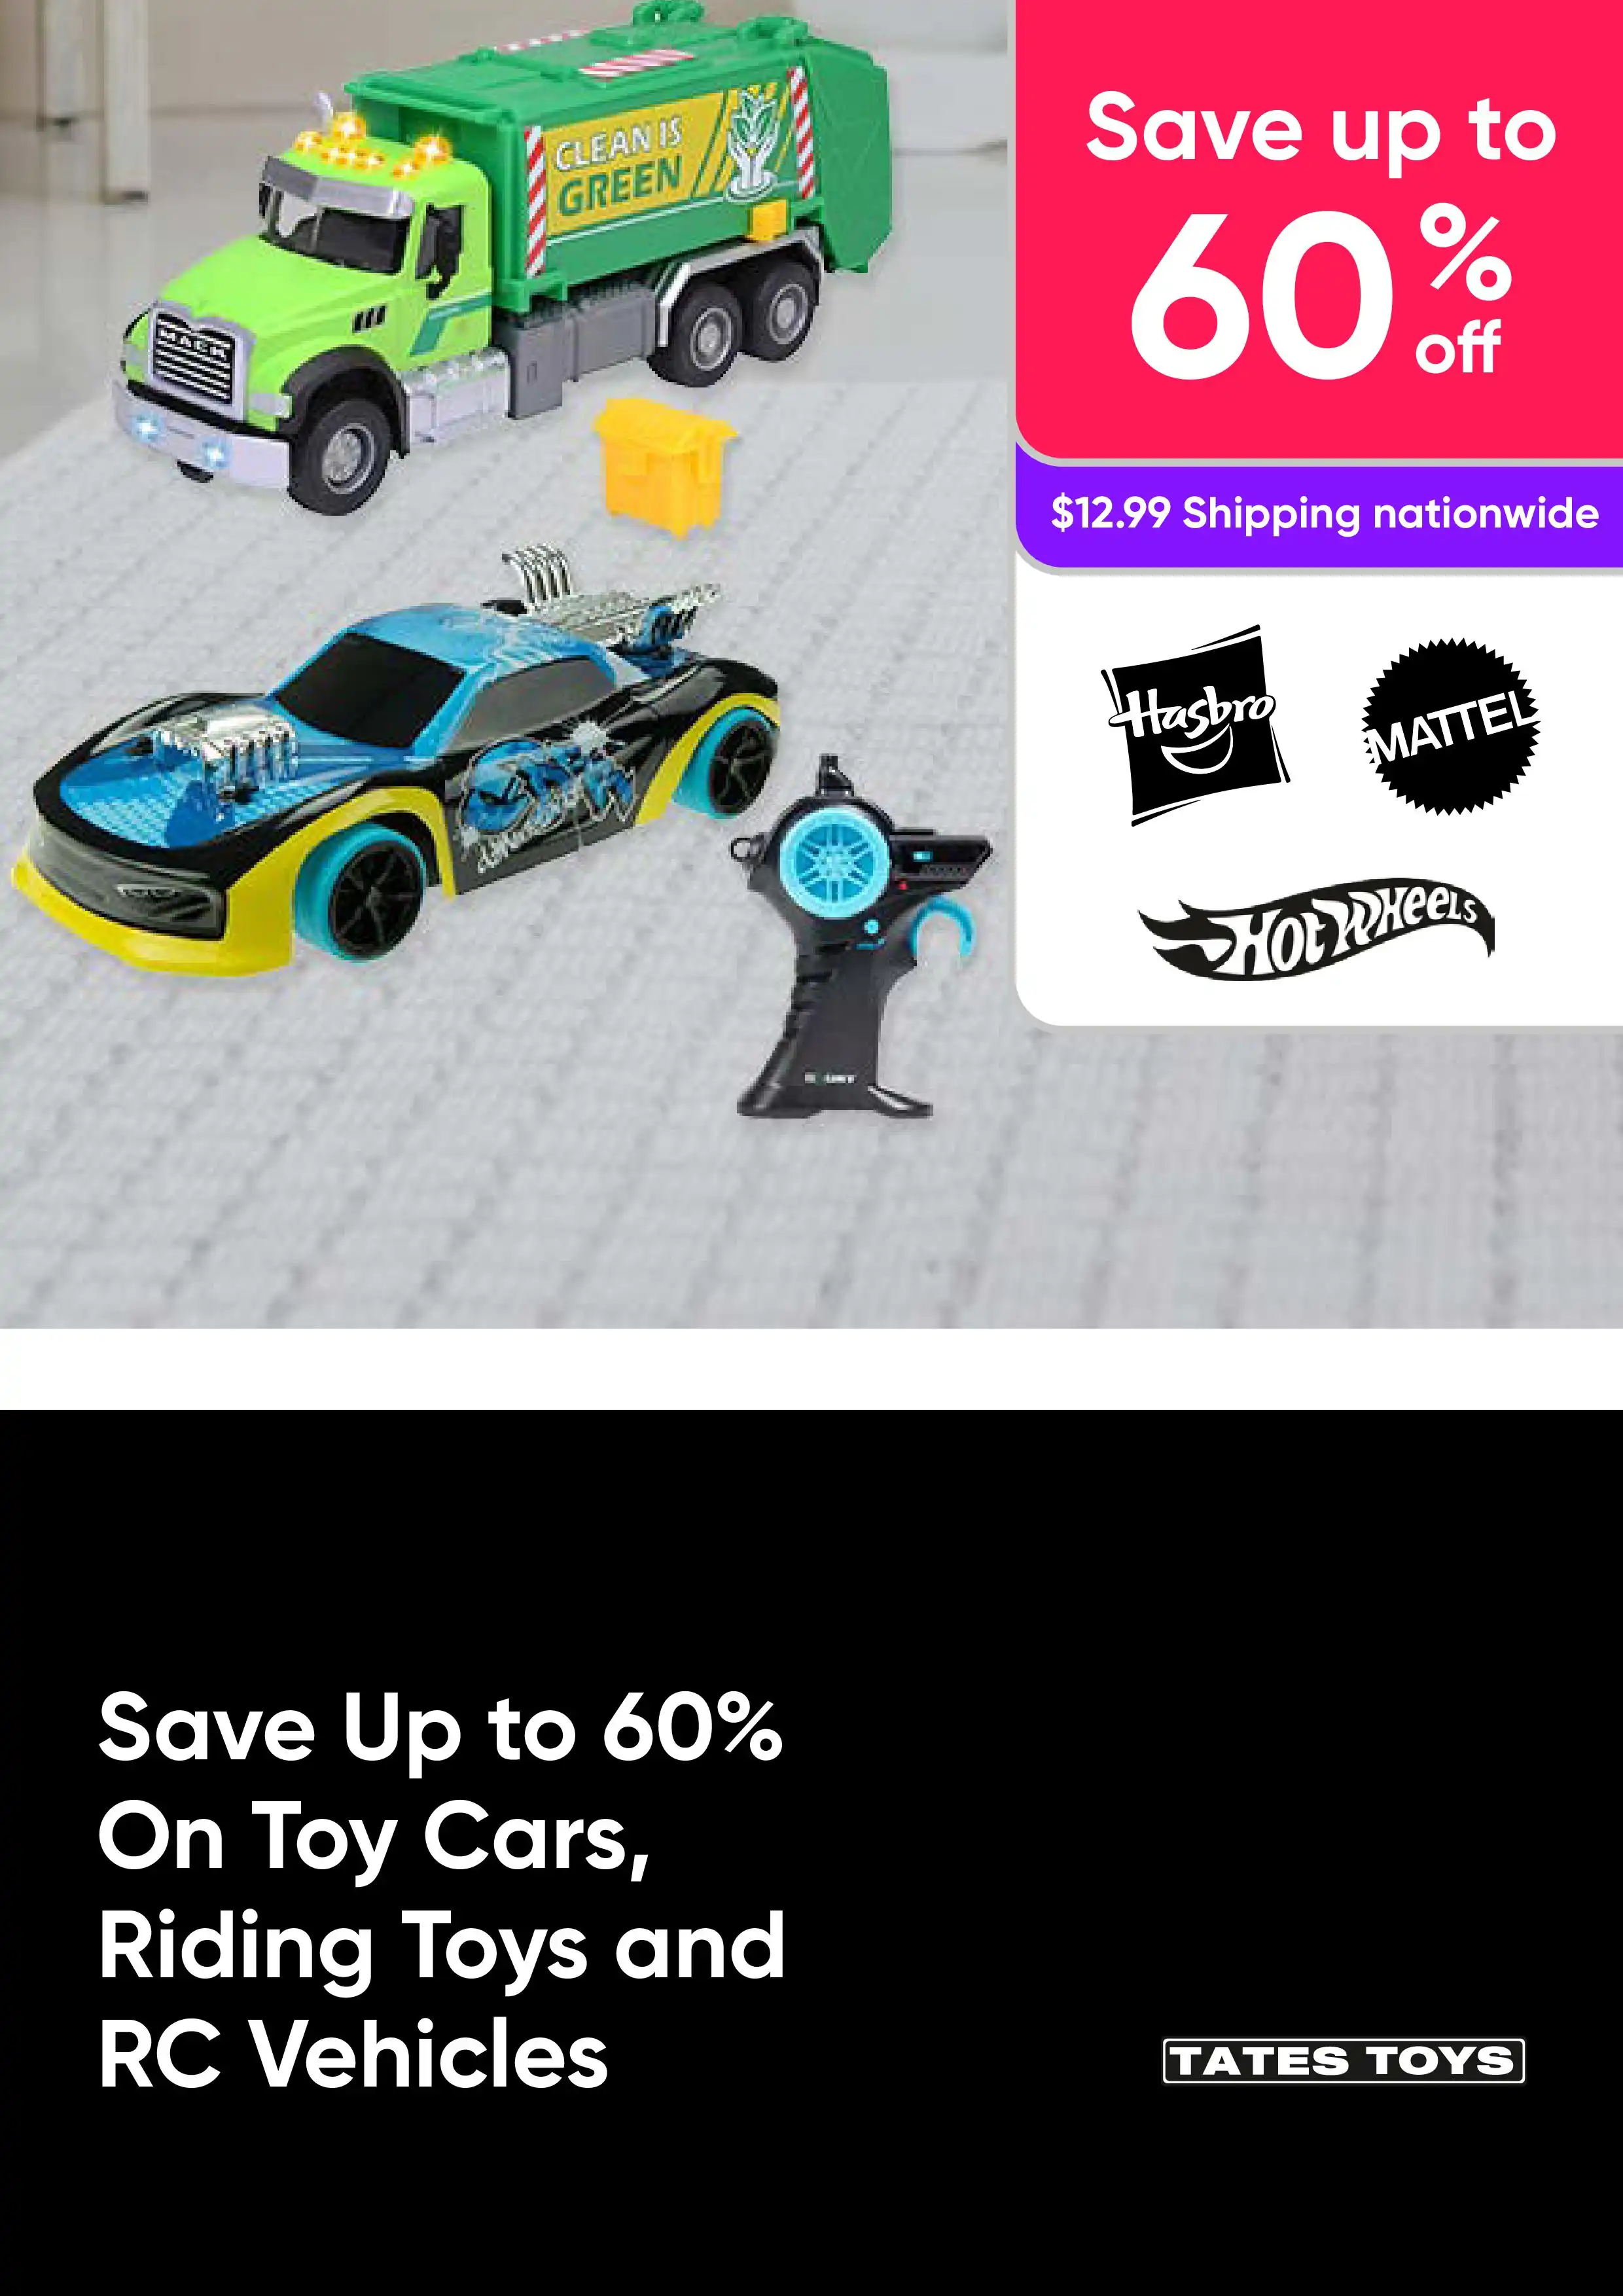 Fast Fun, Save Up to 60% On Toy Cars, Riding Toys and RC Vehicles